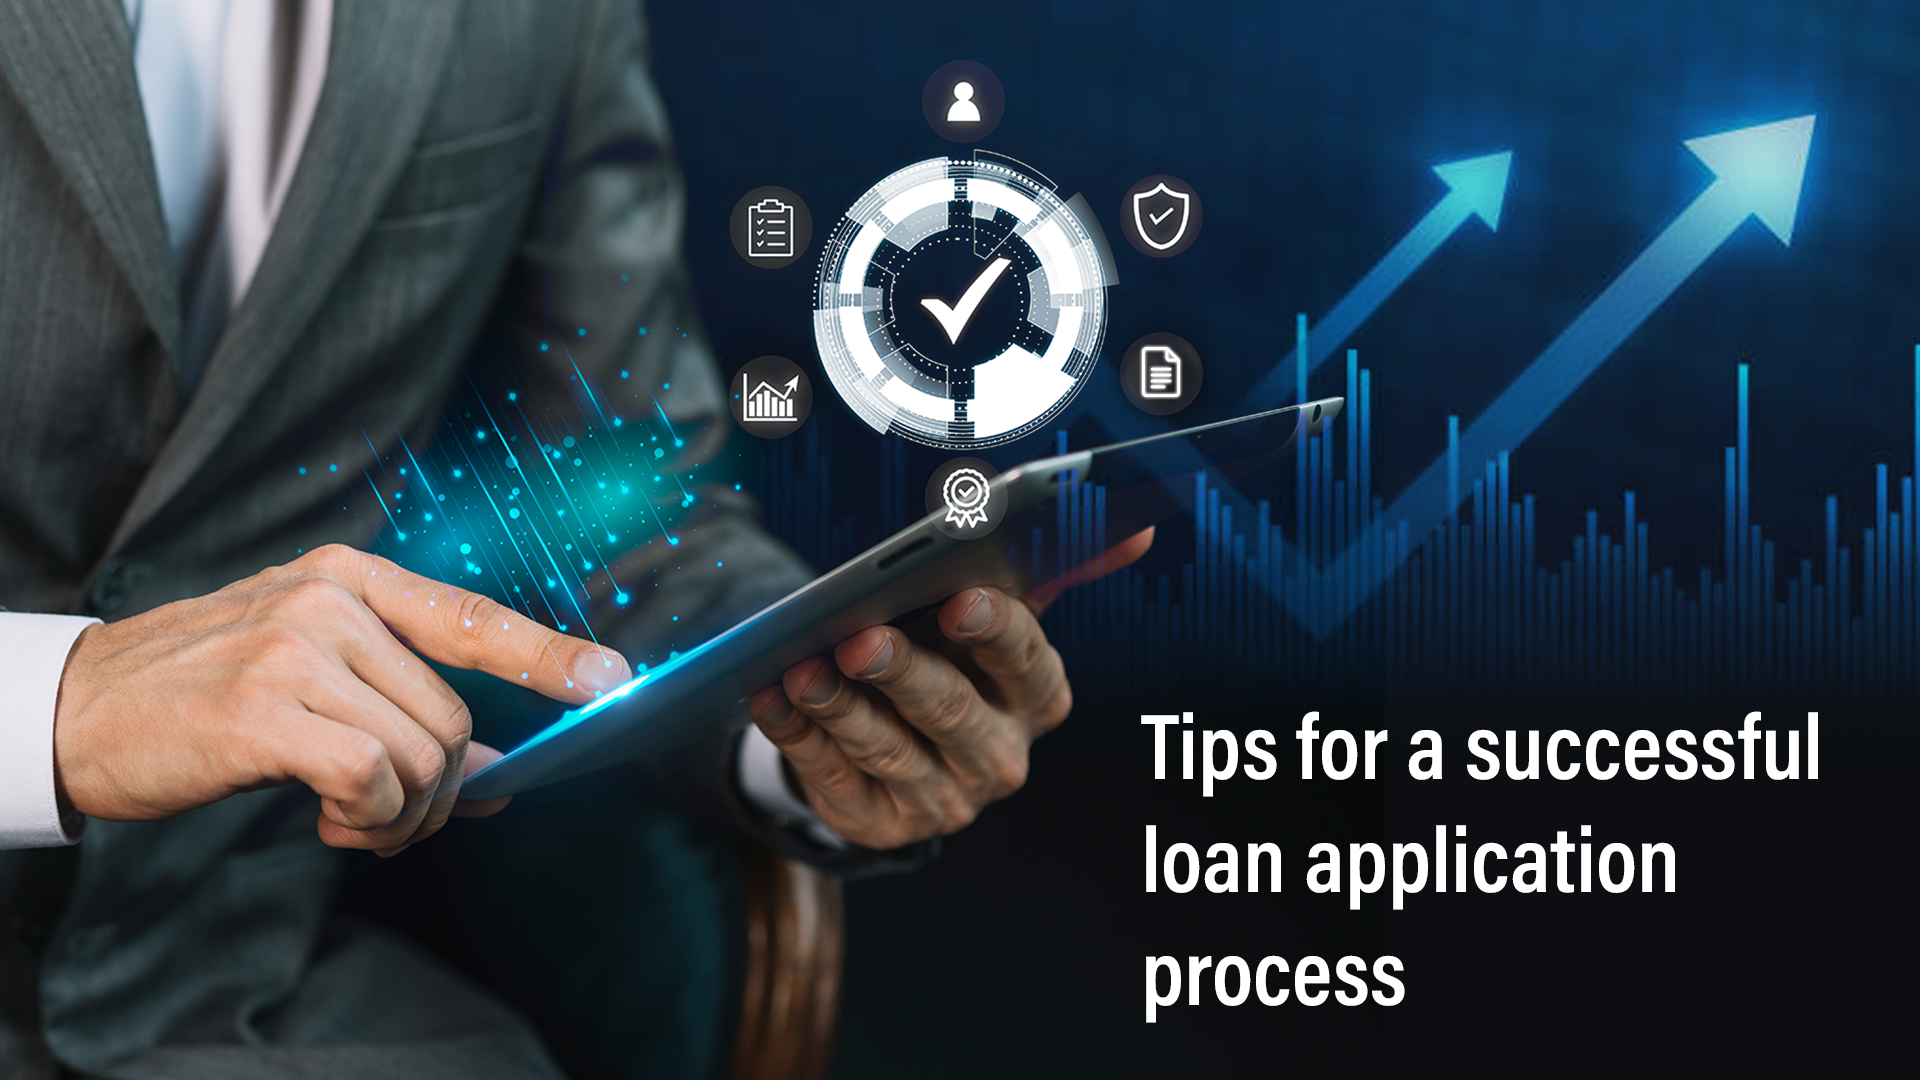 Tips for a Successful Loan Application Process